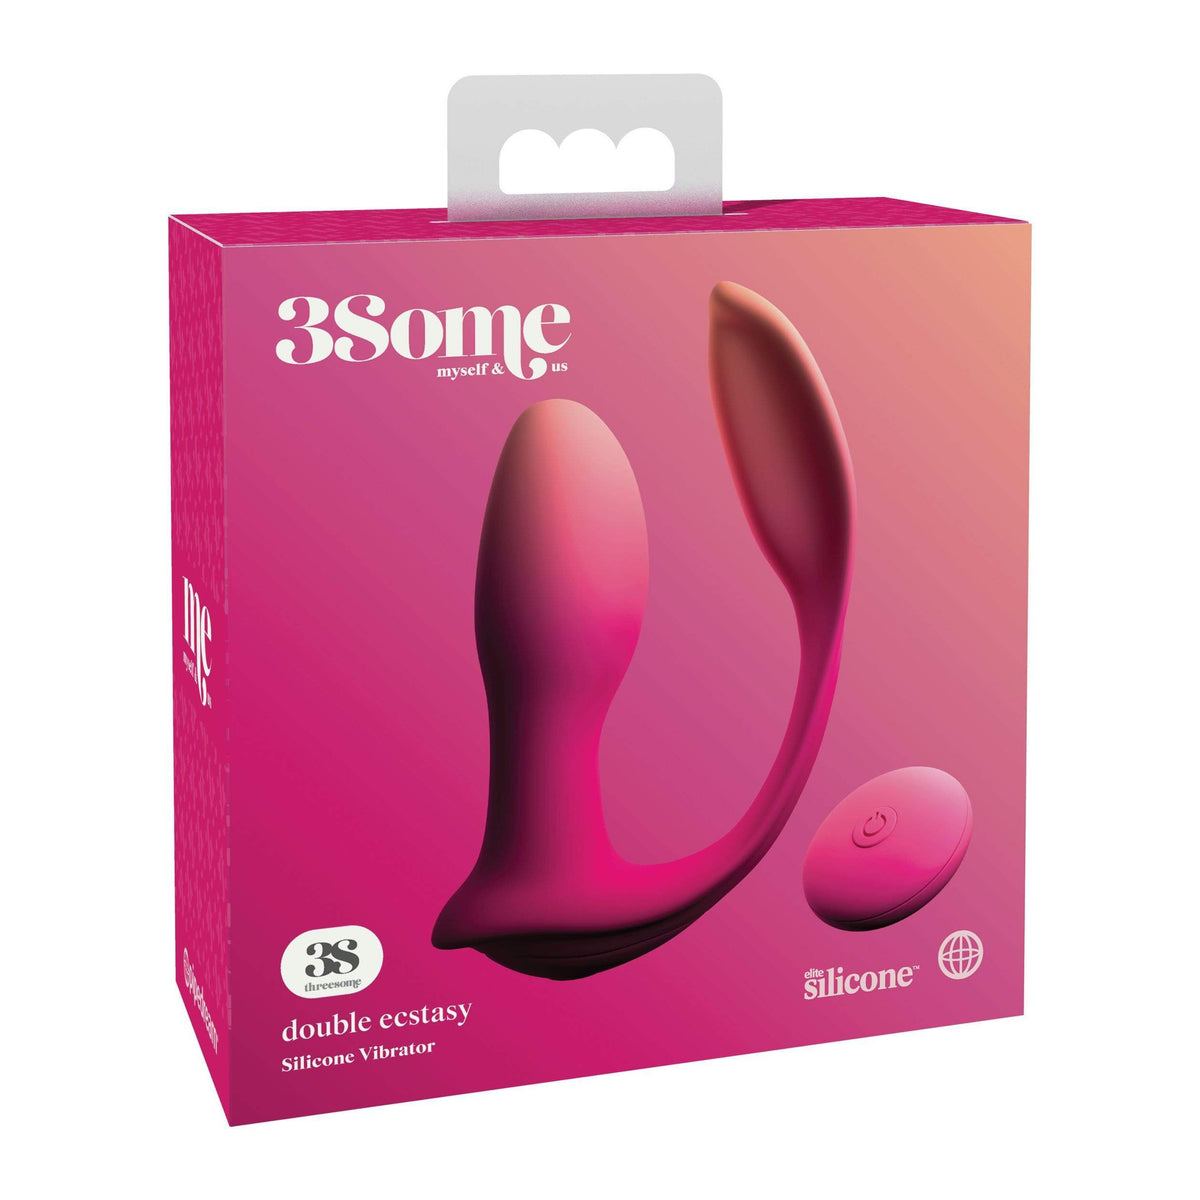 Pipedream - 3Some Myself and Us Double Ecstasy Silicone Vibrator (Pink) -  Couple&#39;s Massager (Vibration) Rechargeable  Durio.sg